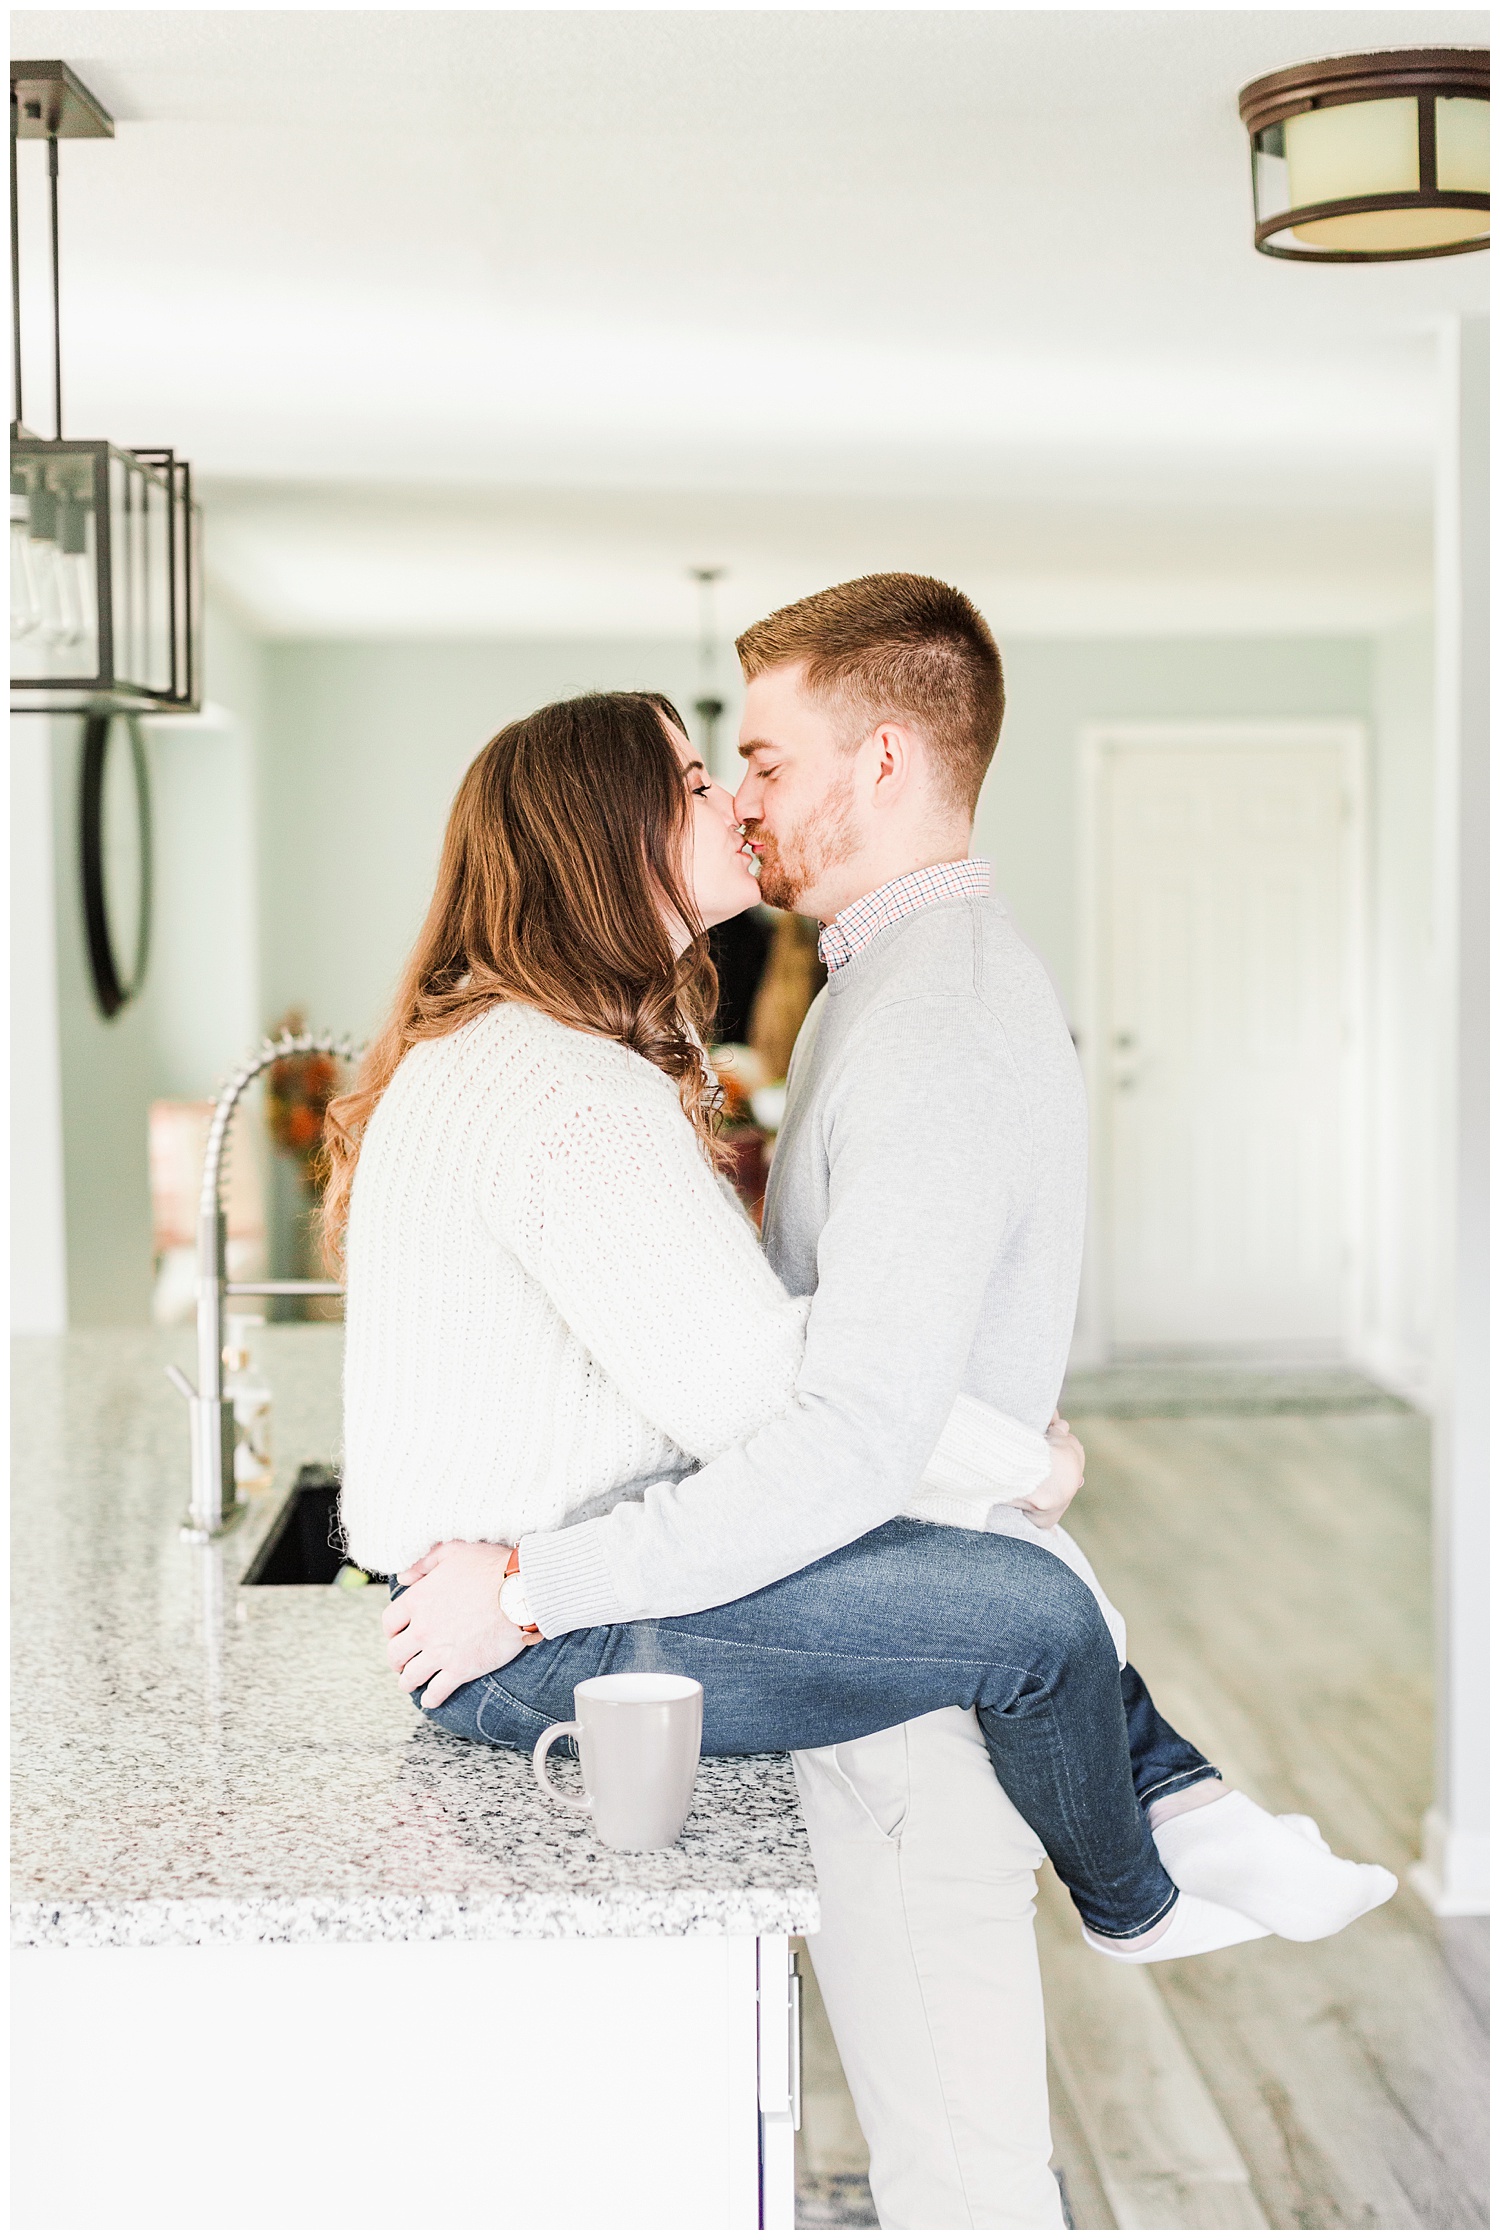 Dustin kisses Jenna while she sits on their kitchen counter | Cozy Kitchen Engagement Session | CB Studio